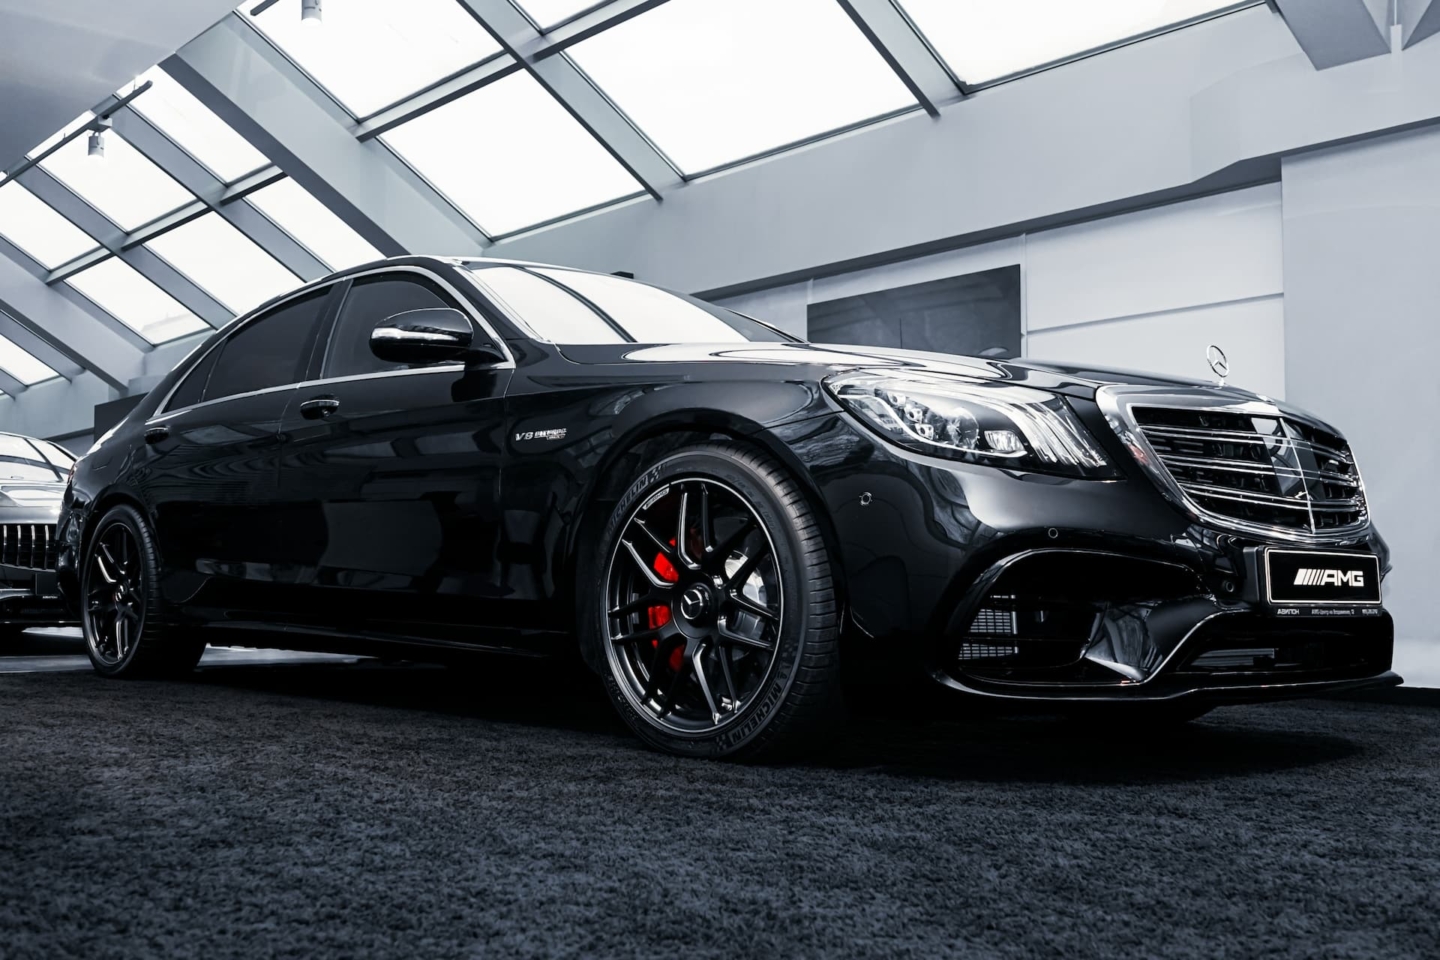 A shiny black Mercedes-Benz C63 AMG parked in a showroom